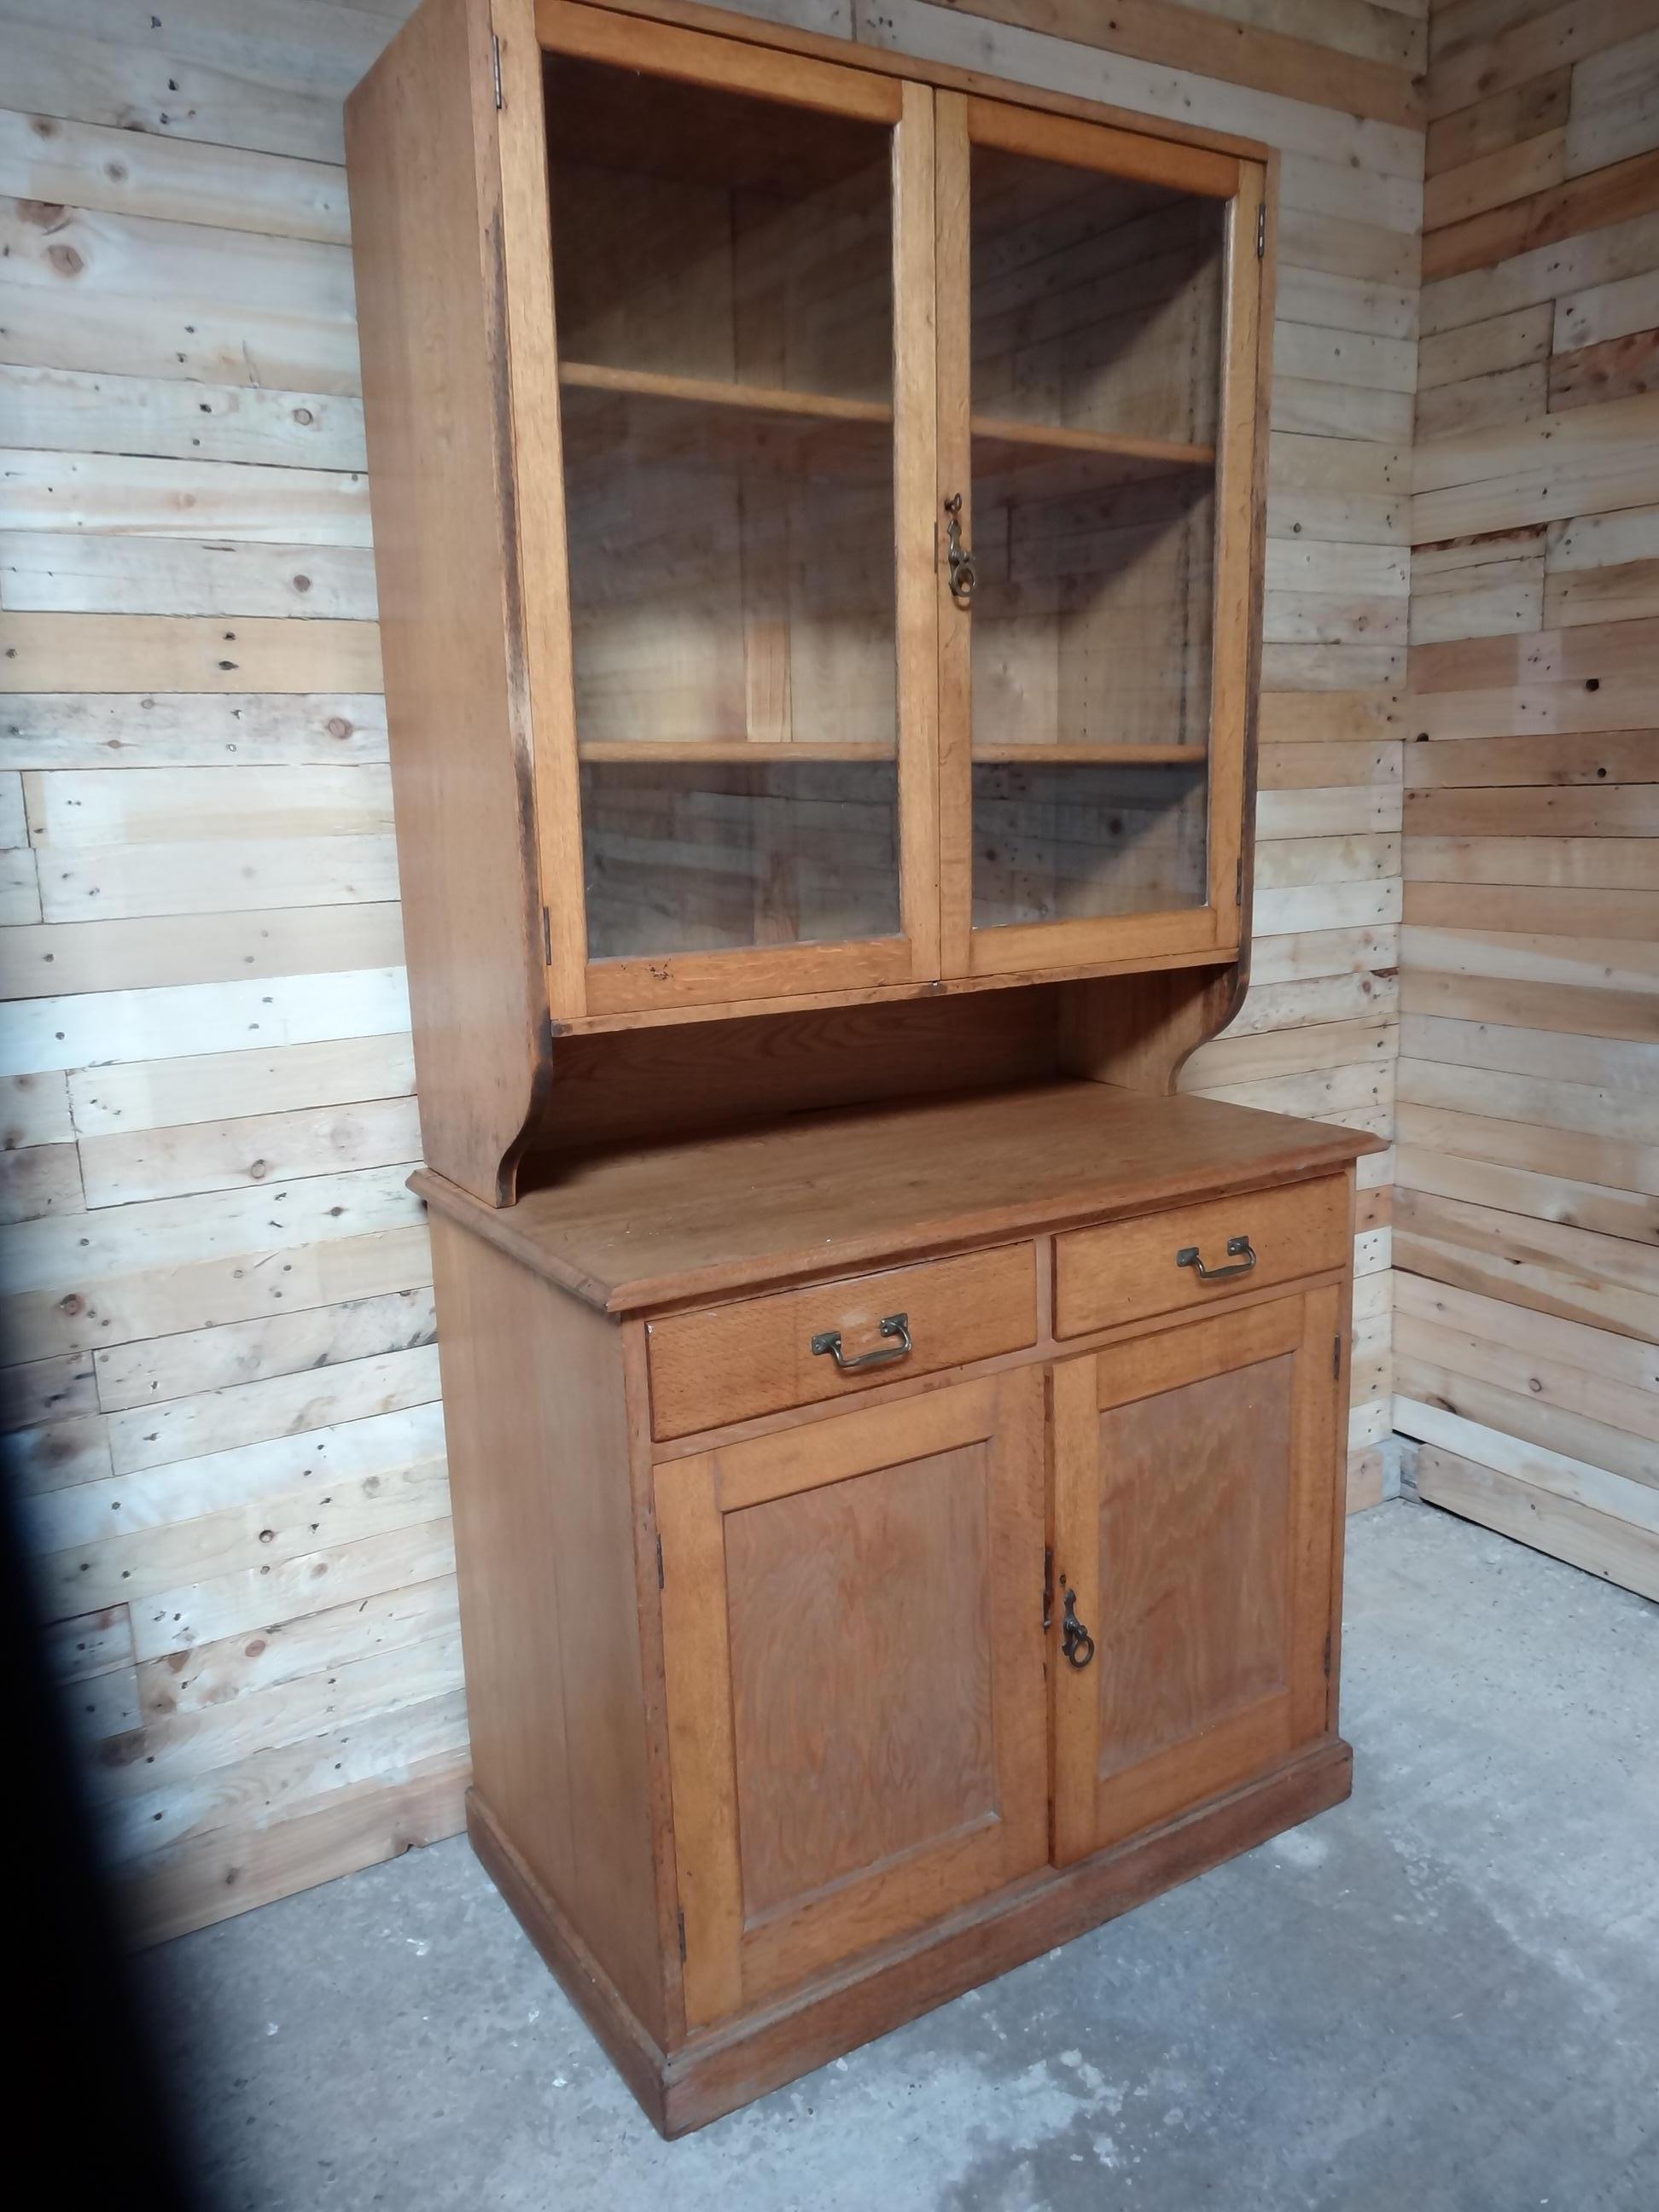 Antique Ca 1900 solid light oak English kitchen cabinet,

Lovely solid oak cabinet in super condition, it has bottom shelving cupboard with two drawers en two doors and a top glazed display section, comes with the original key.

Measures: Height